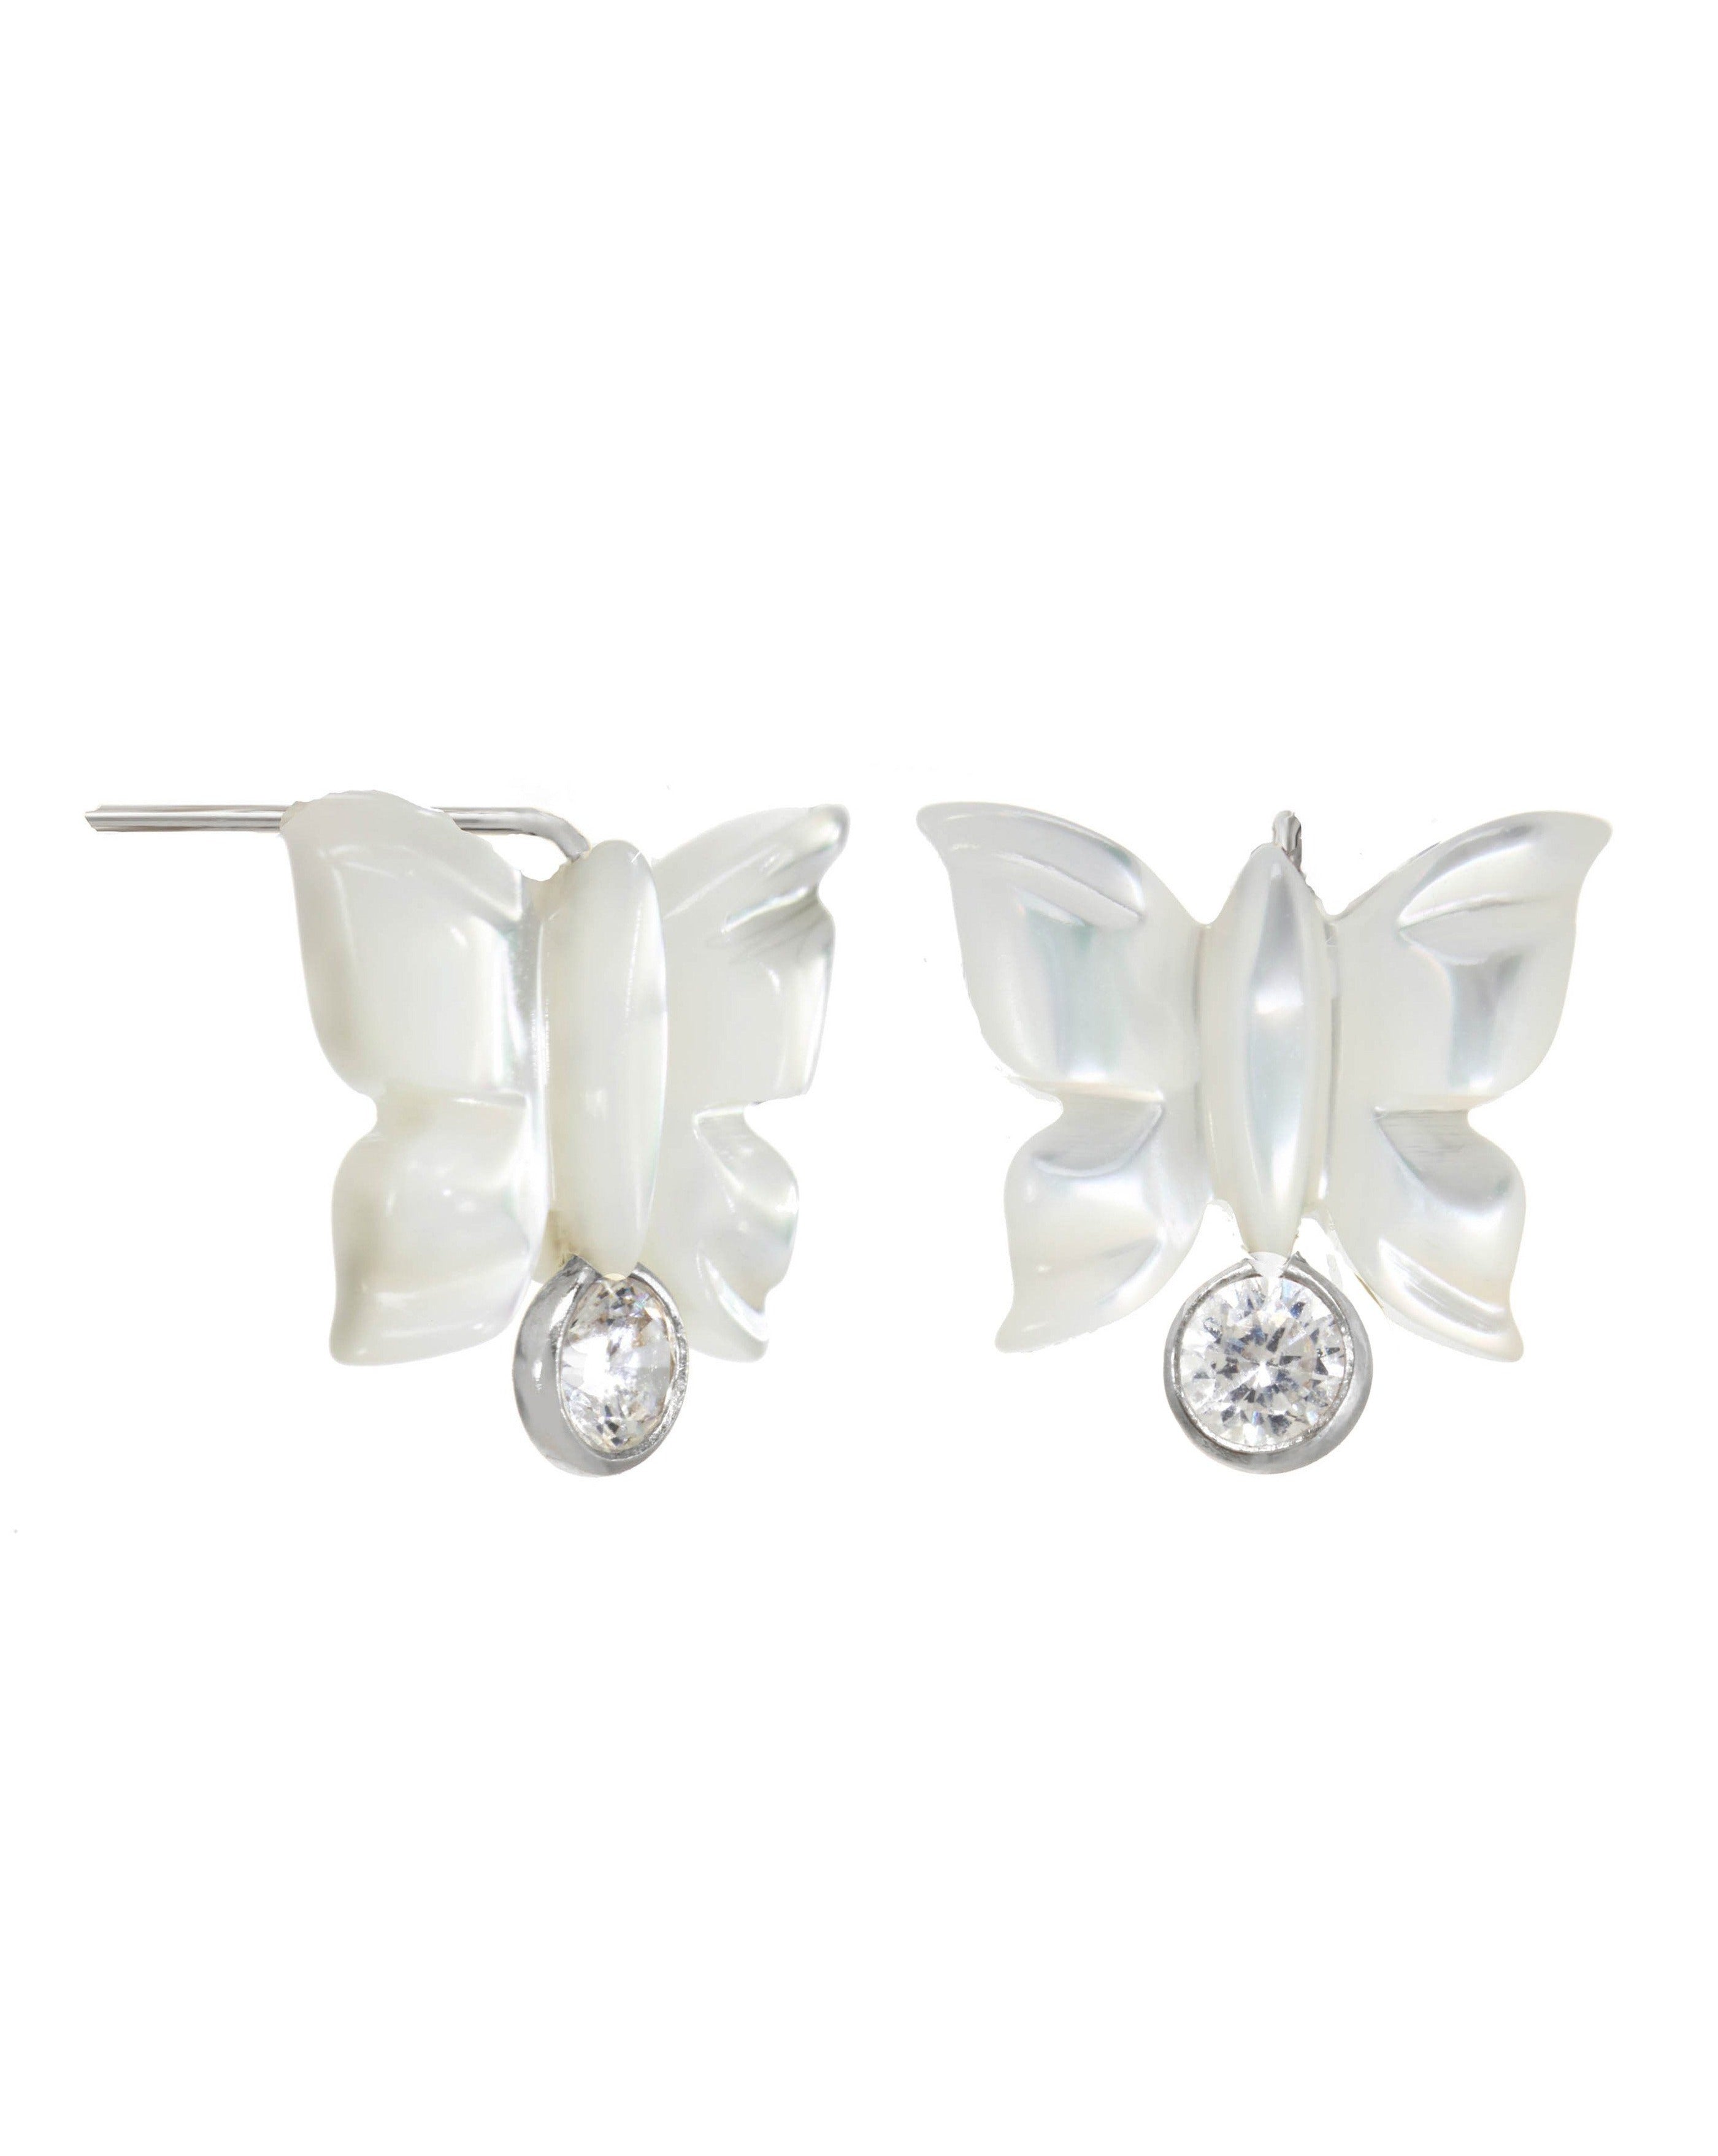 Sevyn Earrings by KOZAKH. Stud earrings, crafted in Sterling Silver, featuring a hand carved butterfly charm and a bezel set Cubic Zirconia.